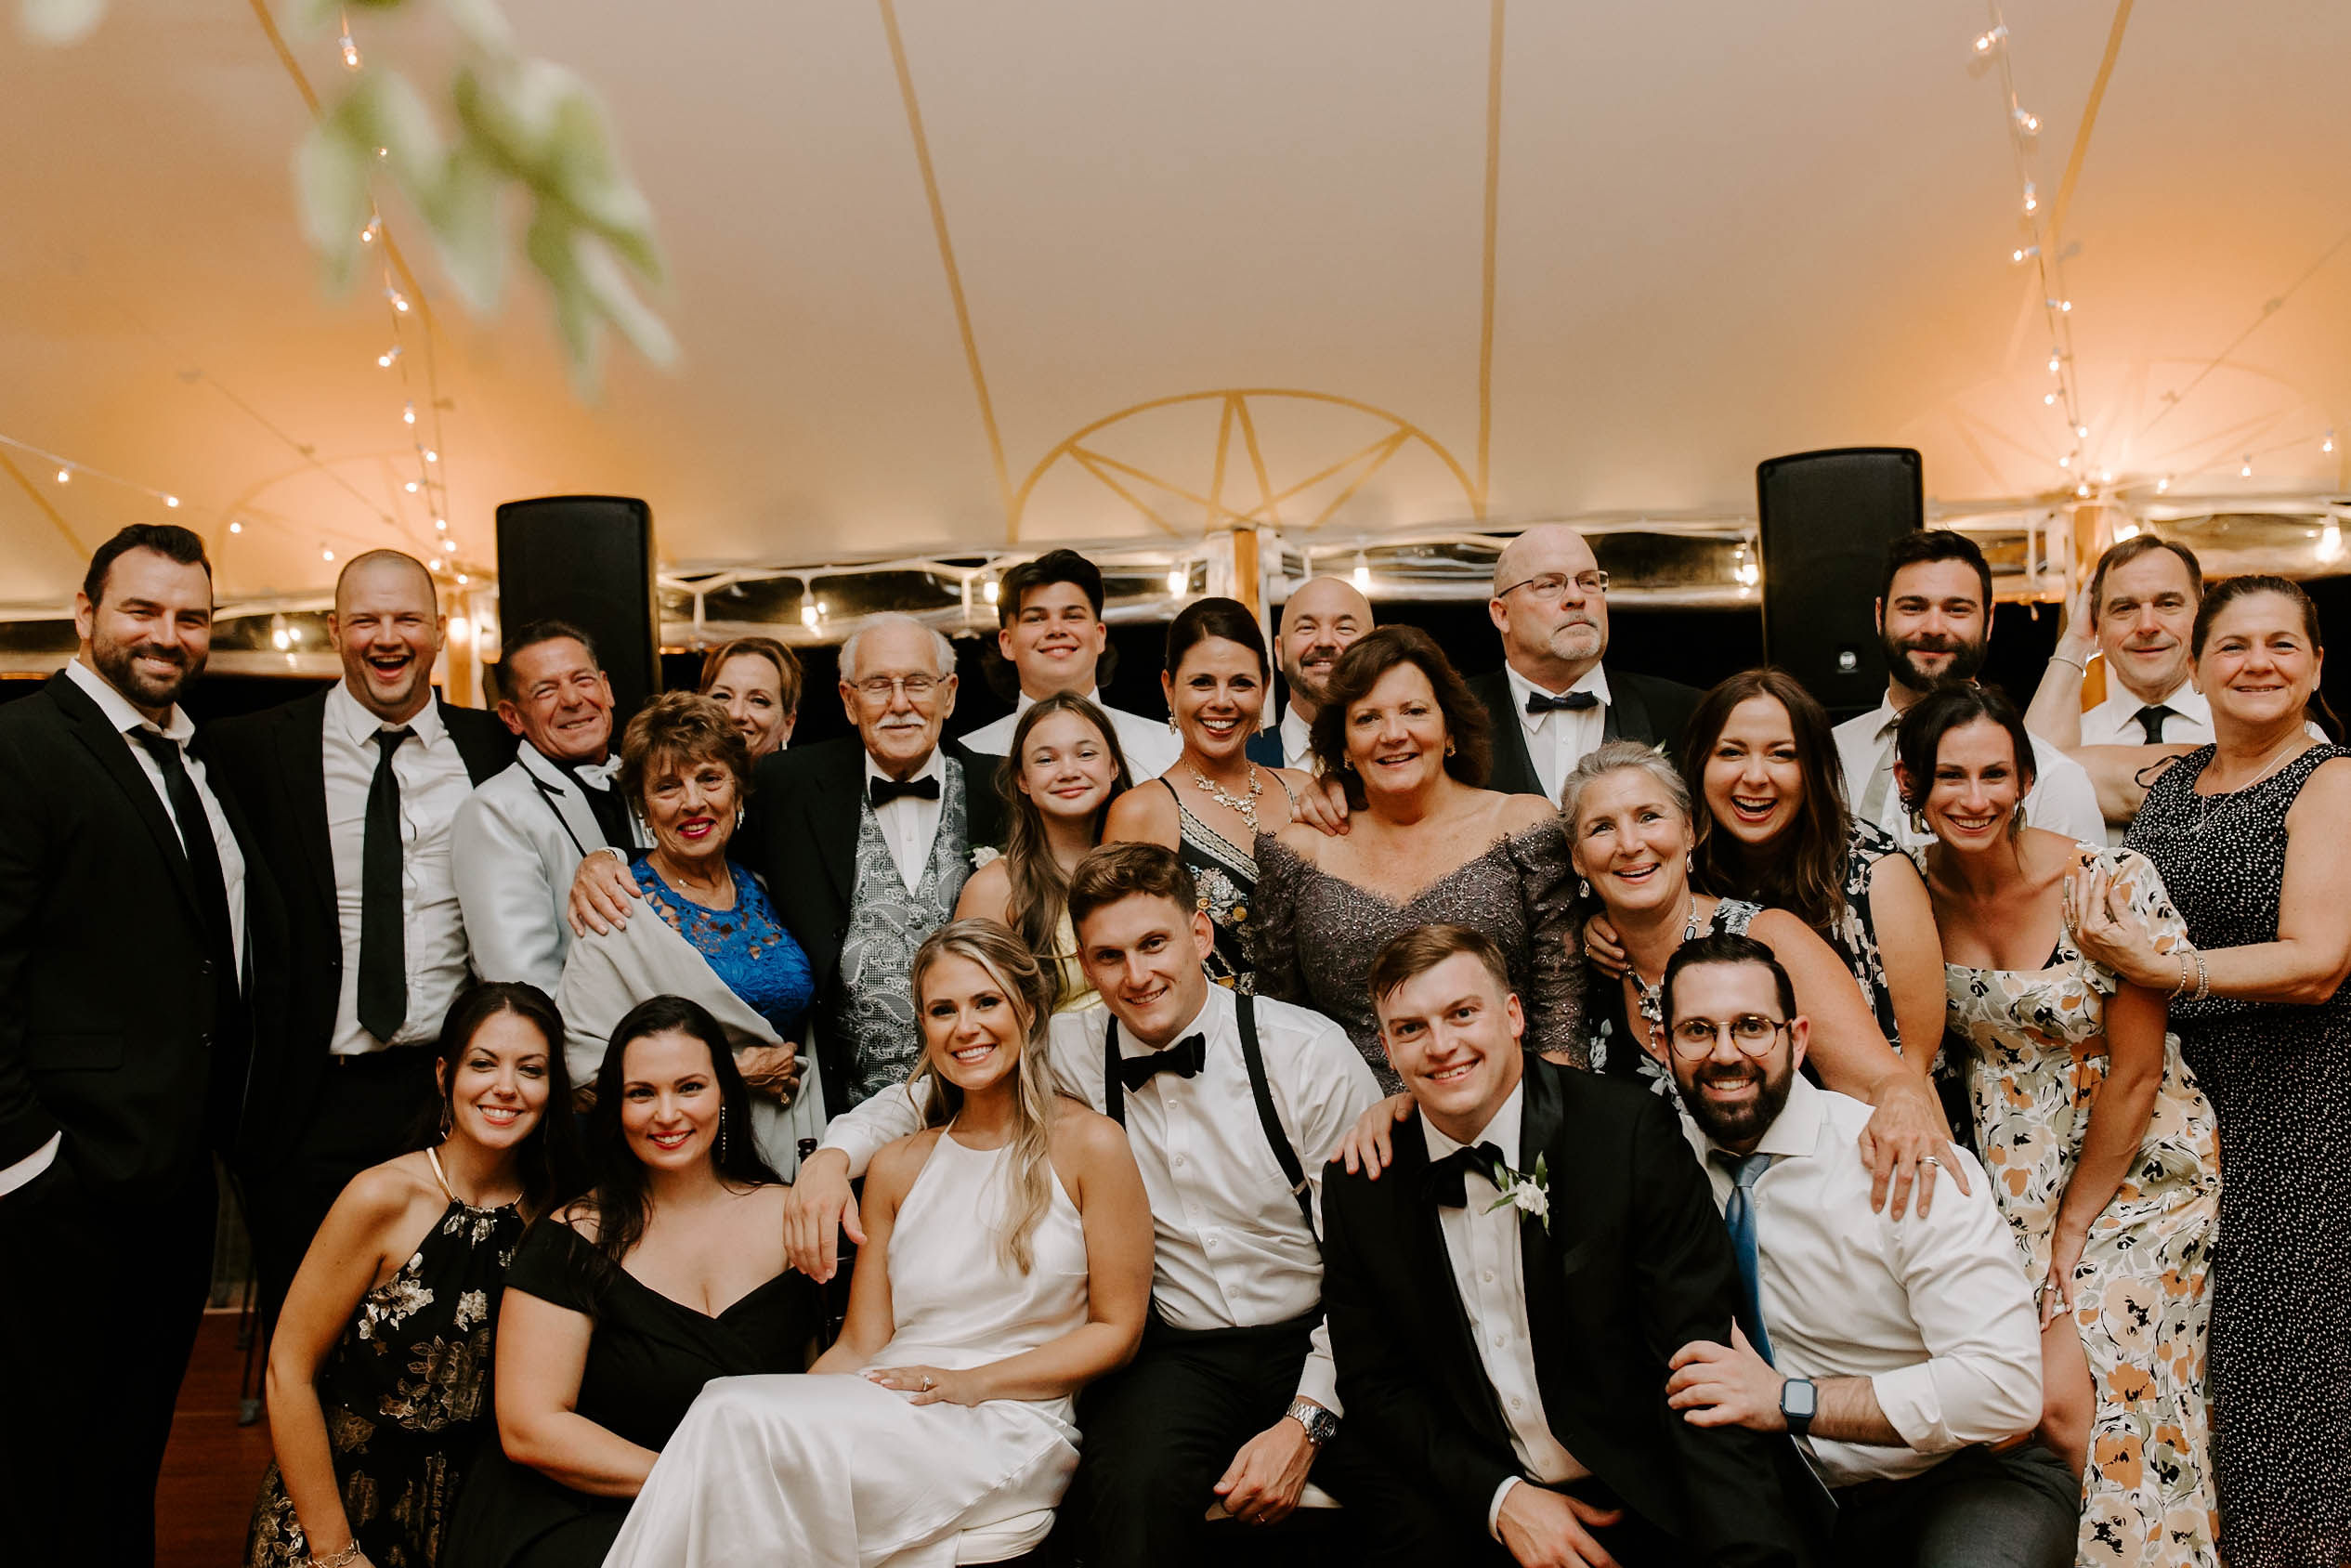 Wedding reception group poses together after a dreamy Boston wedding